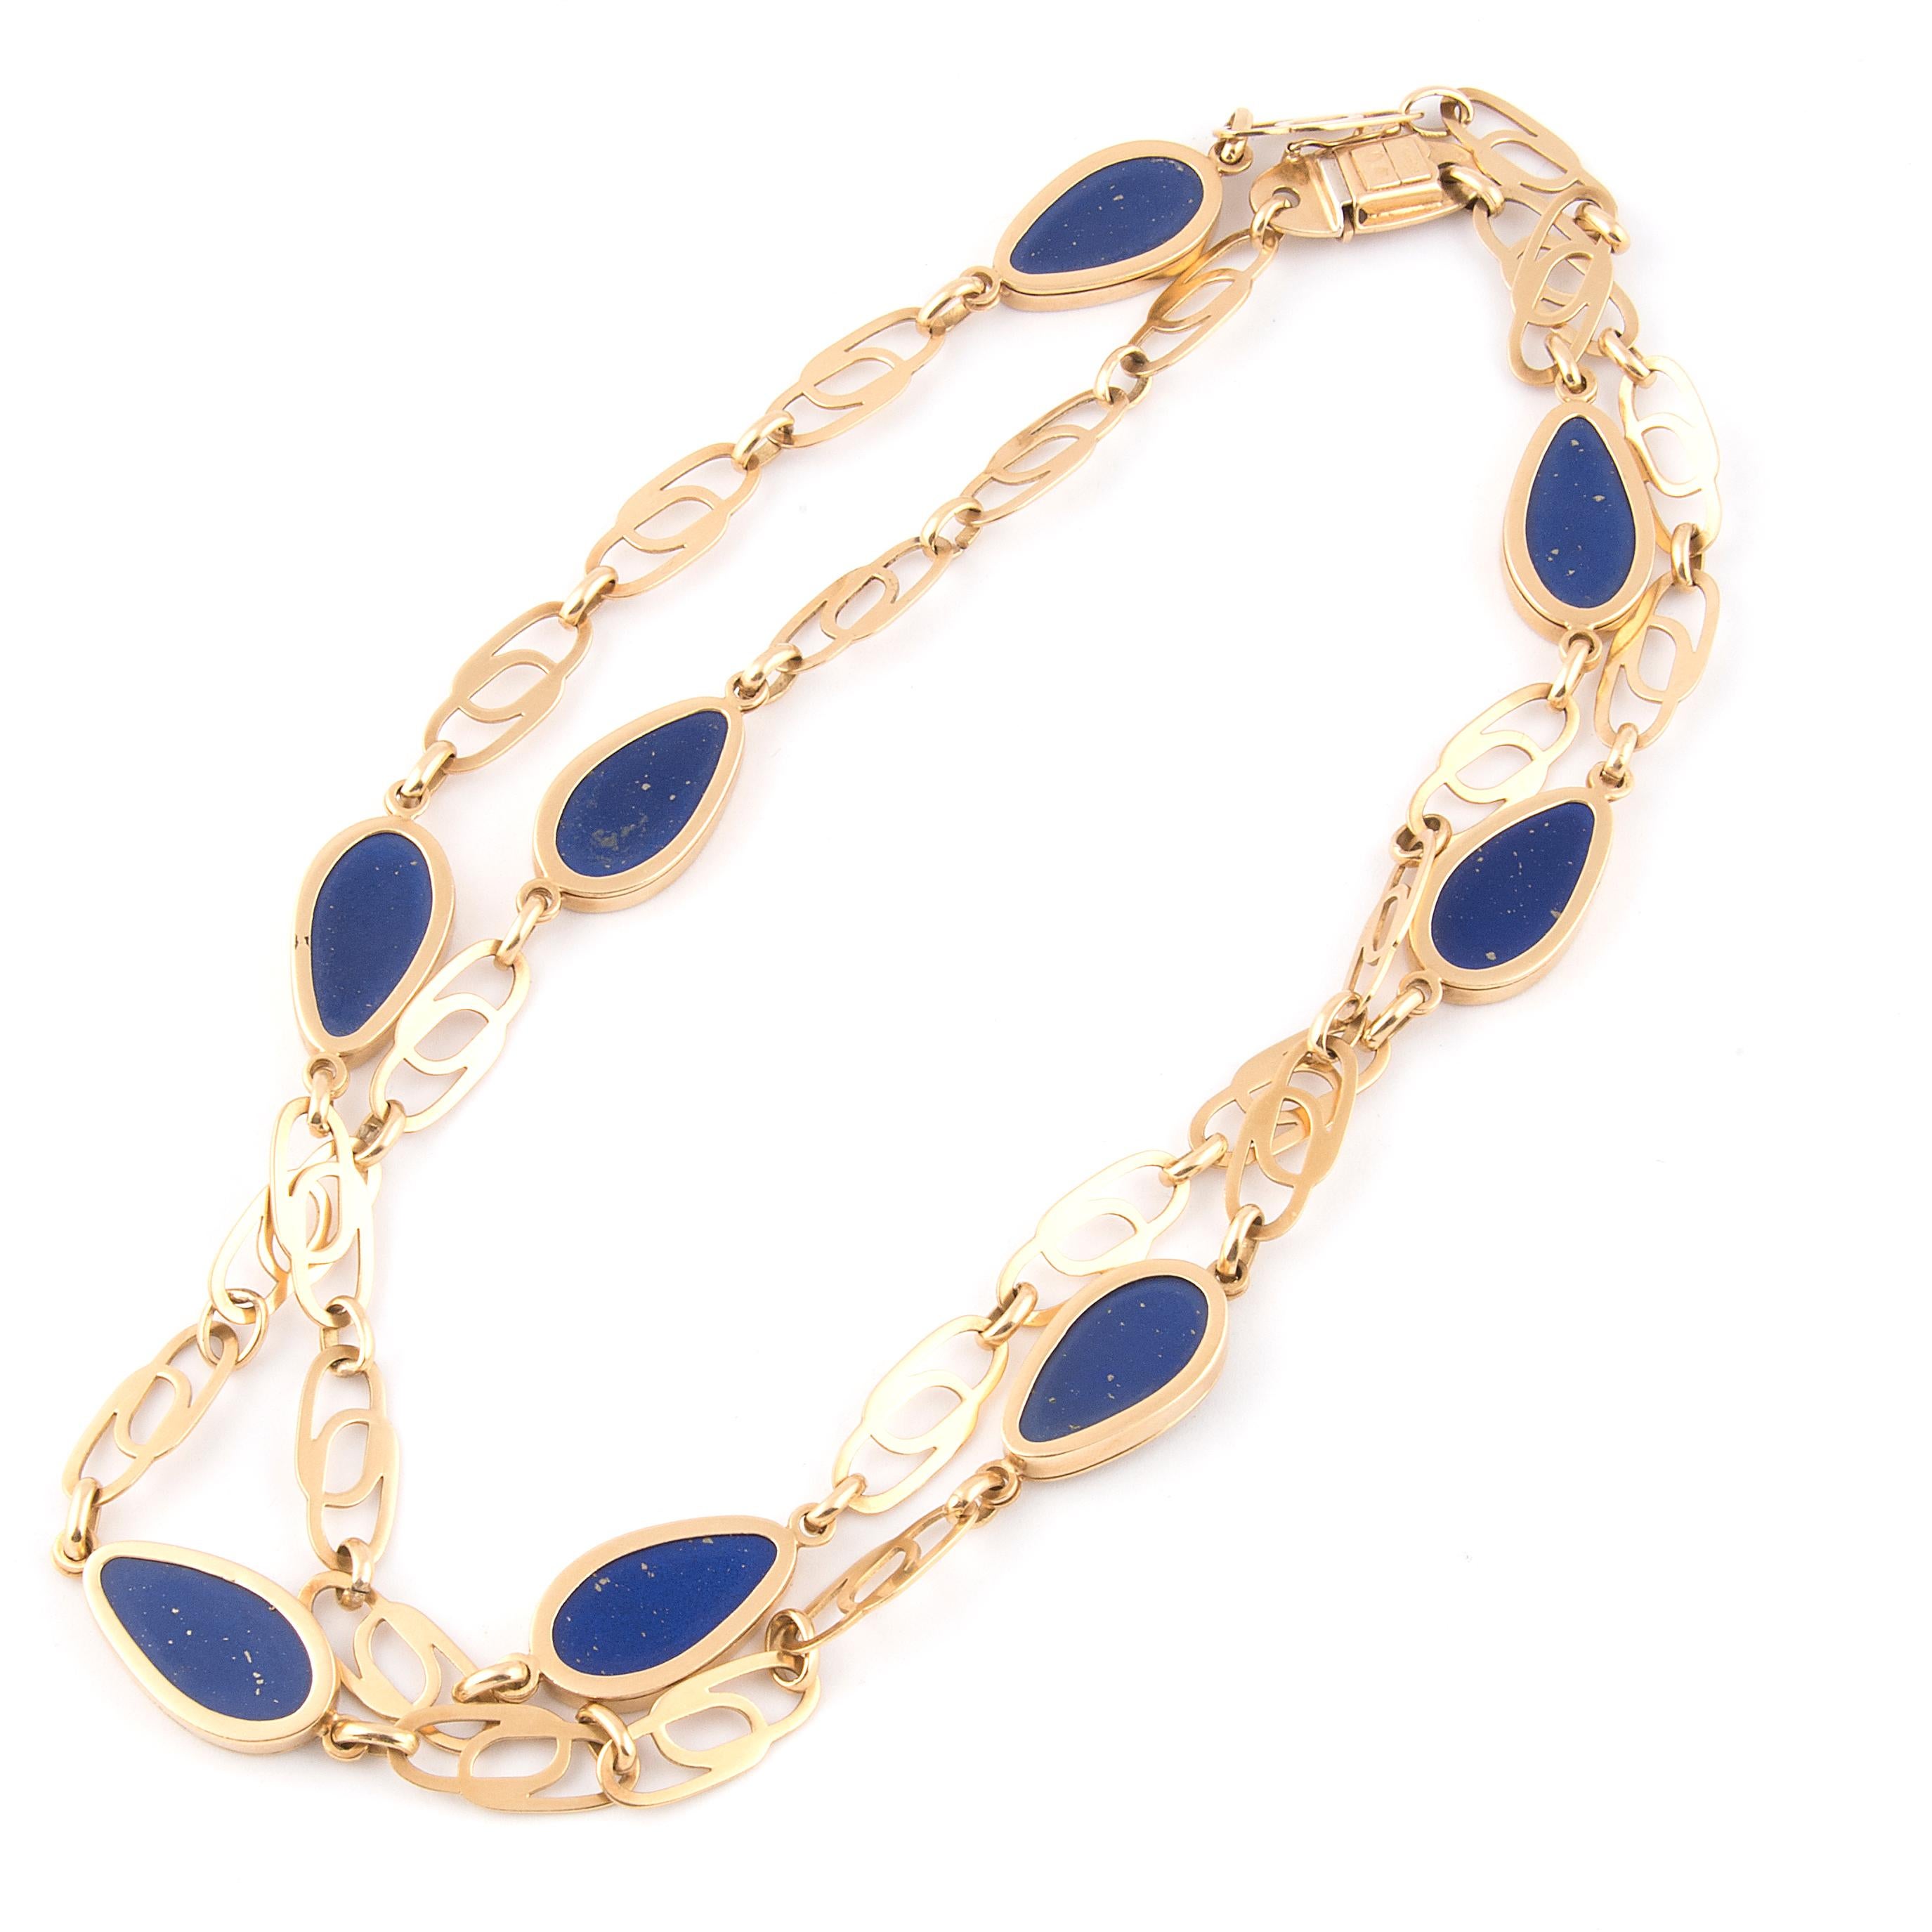 Vassellari 18k Yellow Gold and Lapis Lazuli Long Chain Necklace In Good Condition For Sale In London, GB